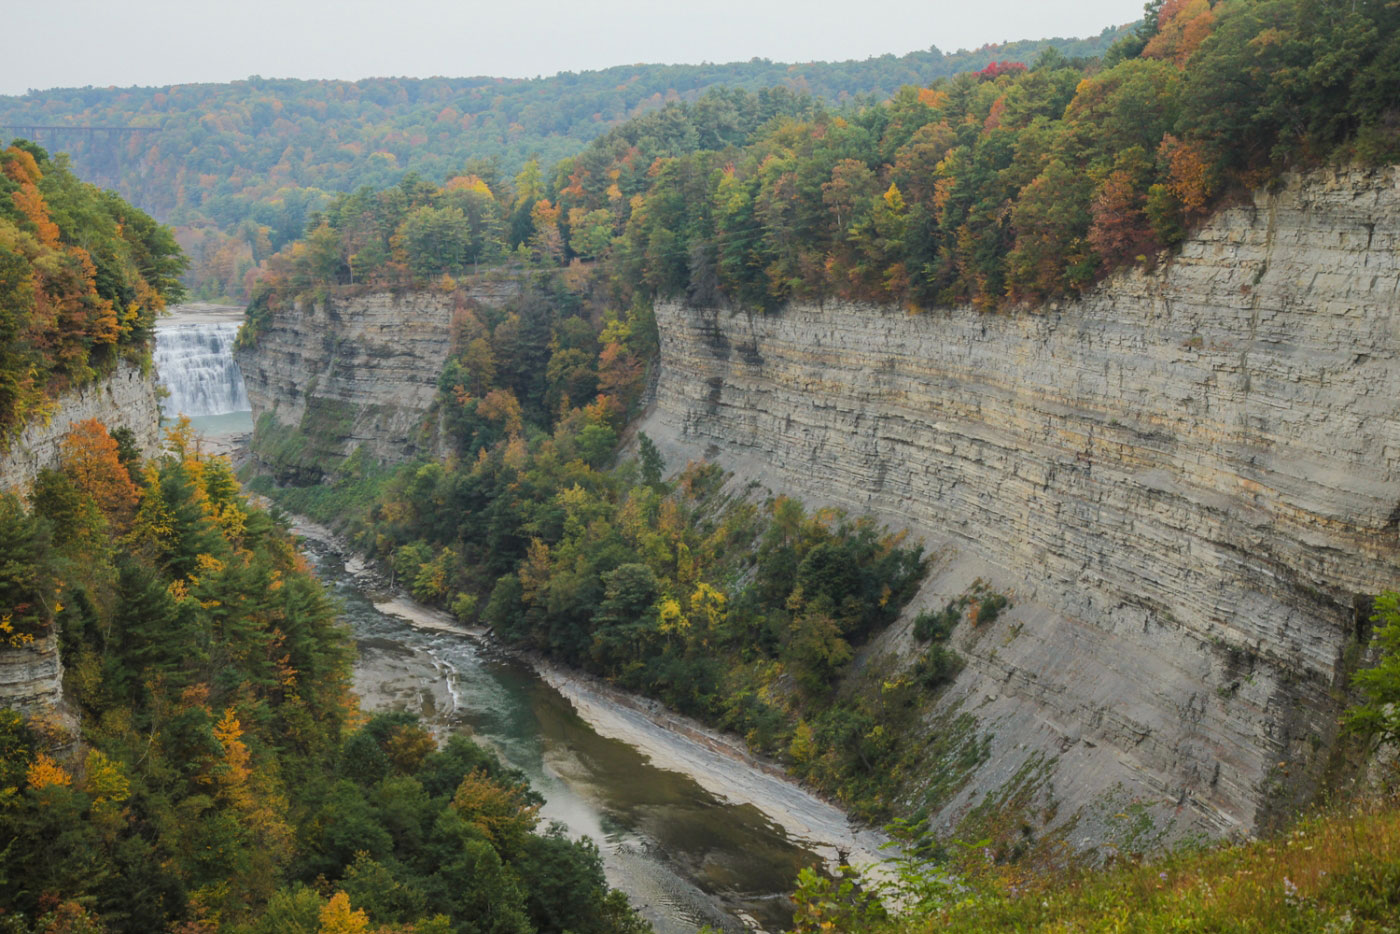 Hike Letchworth Gorge Trail from Upper to Lower Falls in Letchworth State Park, New York - Stav is Lost